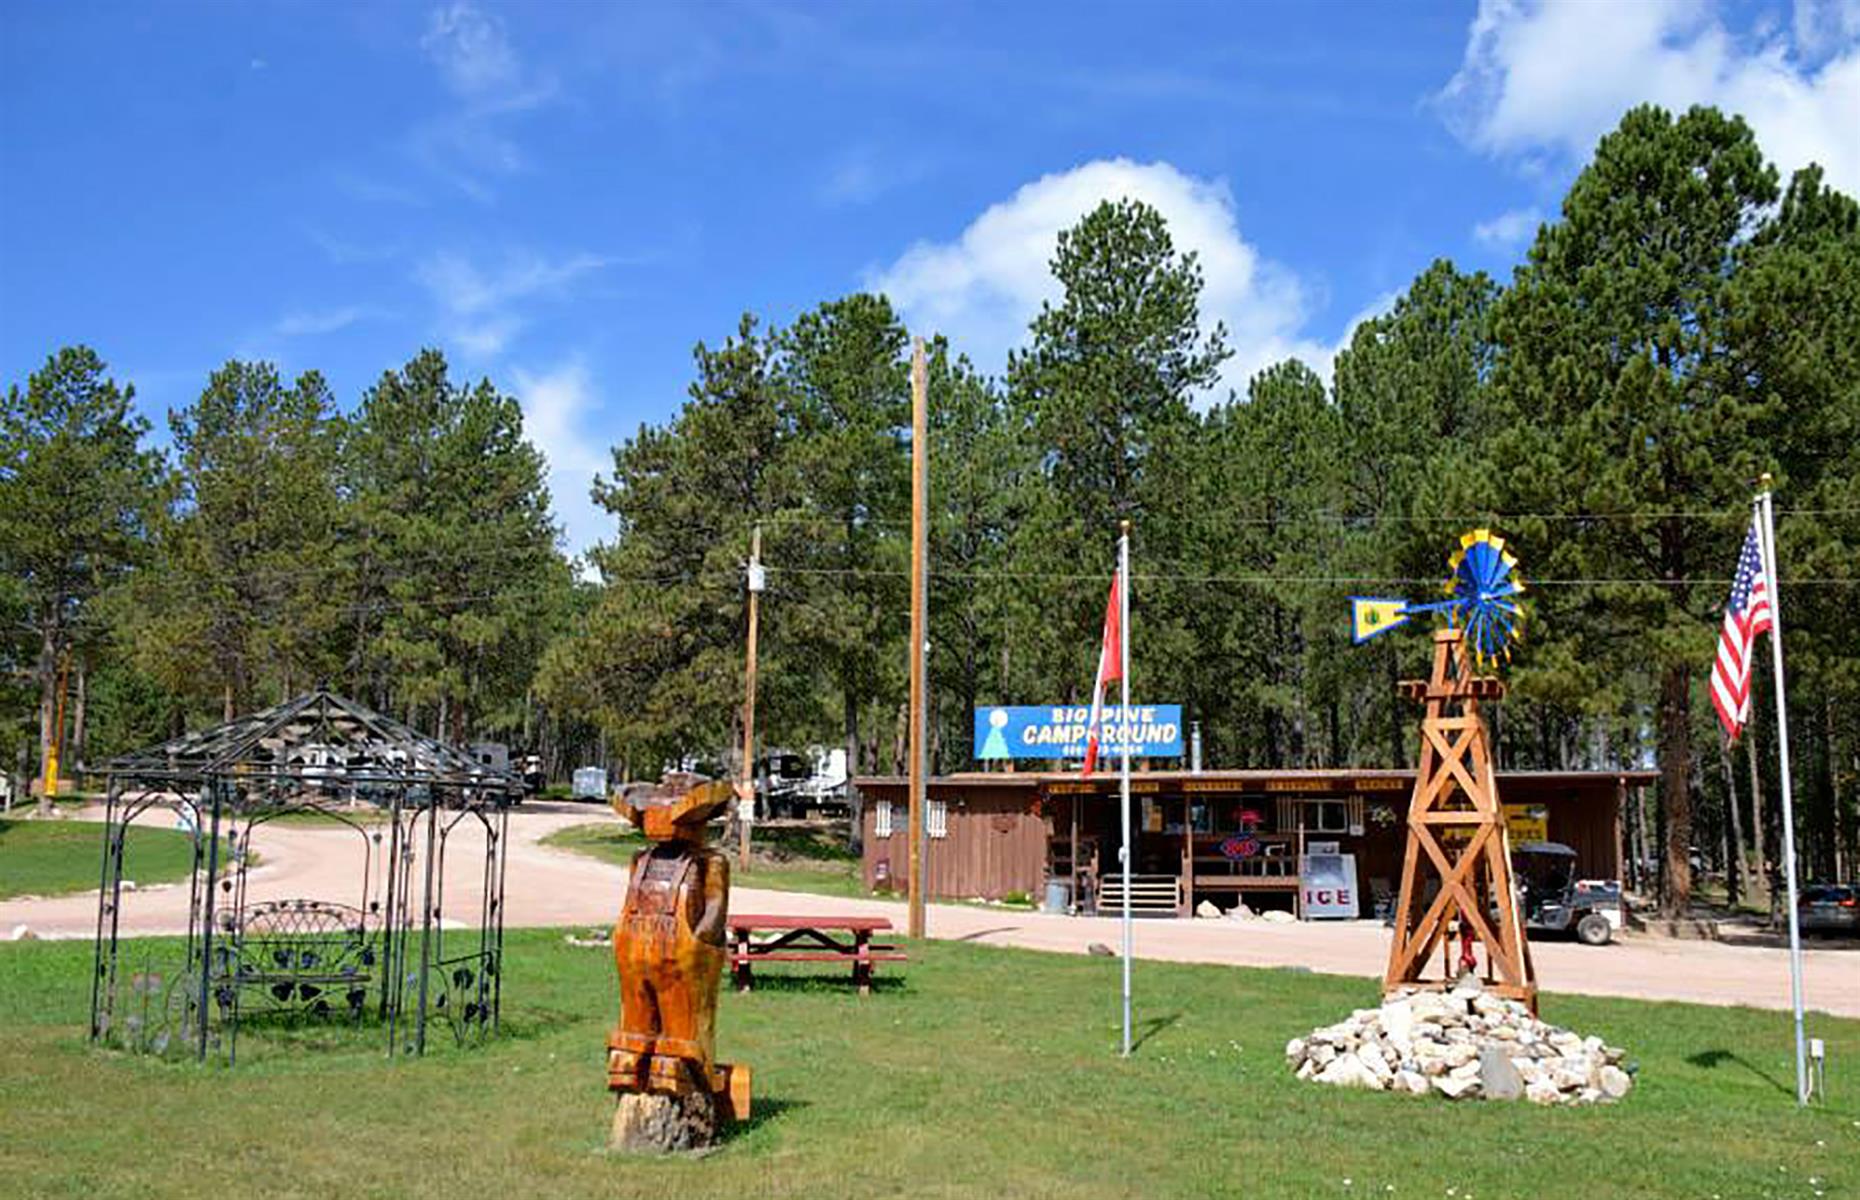 <p><a href="https://www.bigpinecampground.com/">Big Pine Campground</a> enjoys pride of place in the rugged Black Hills region of South Dakota. The spirit of the Old West lives on in this region, with its badlands and bison, and the pine-filled campground is true to its surroundings – it has a rustic camp store and no-frills lots. You'll have everything you need, though, including full hook-up sites and friendly staff on hand to help should you need them.</p>